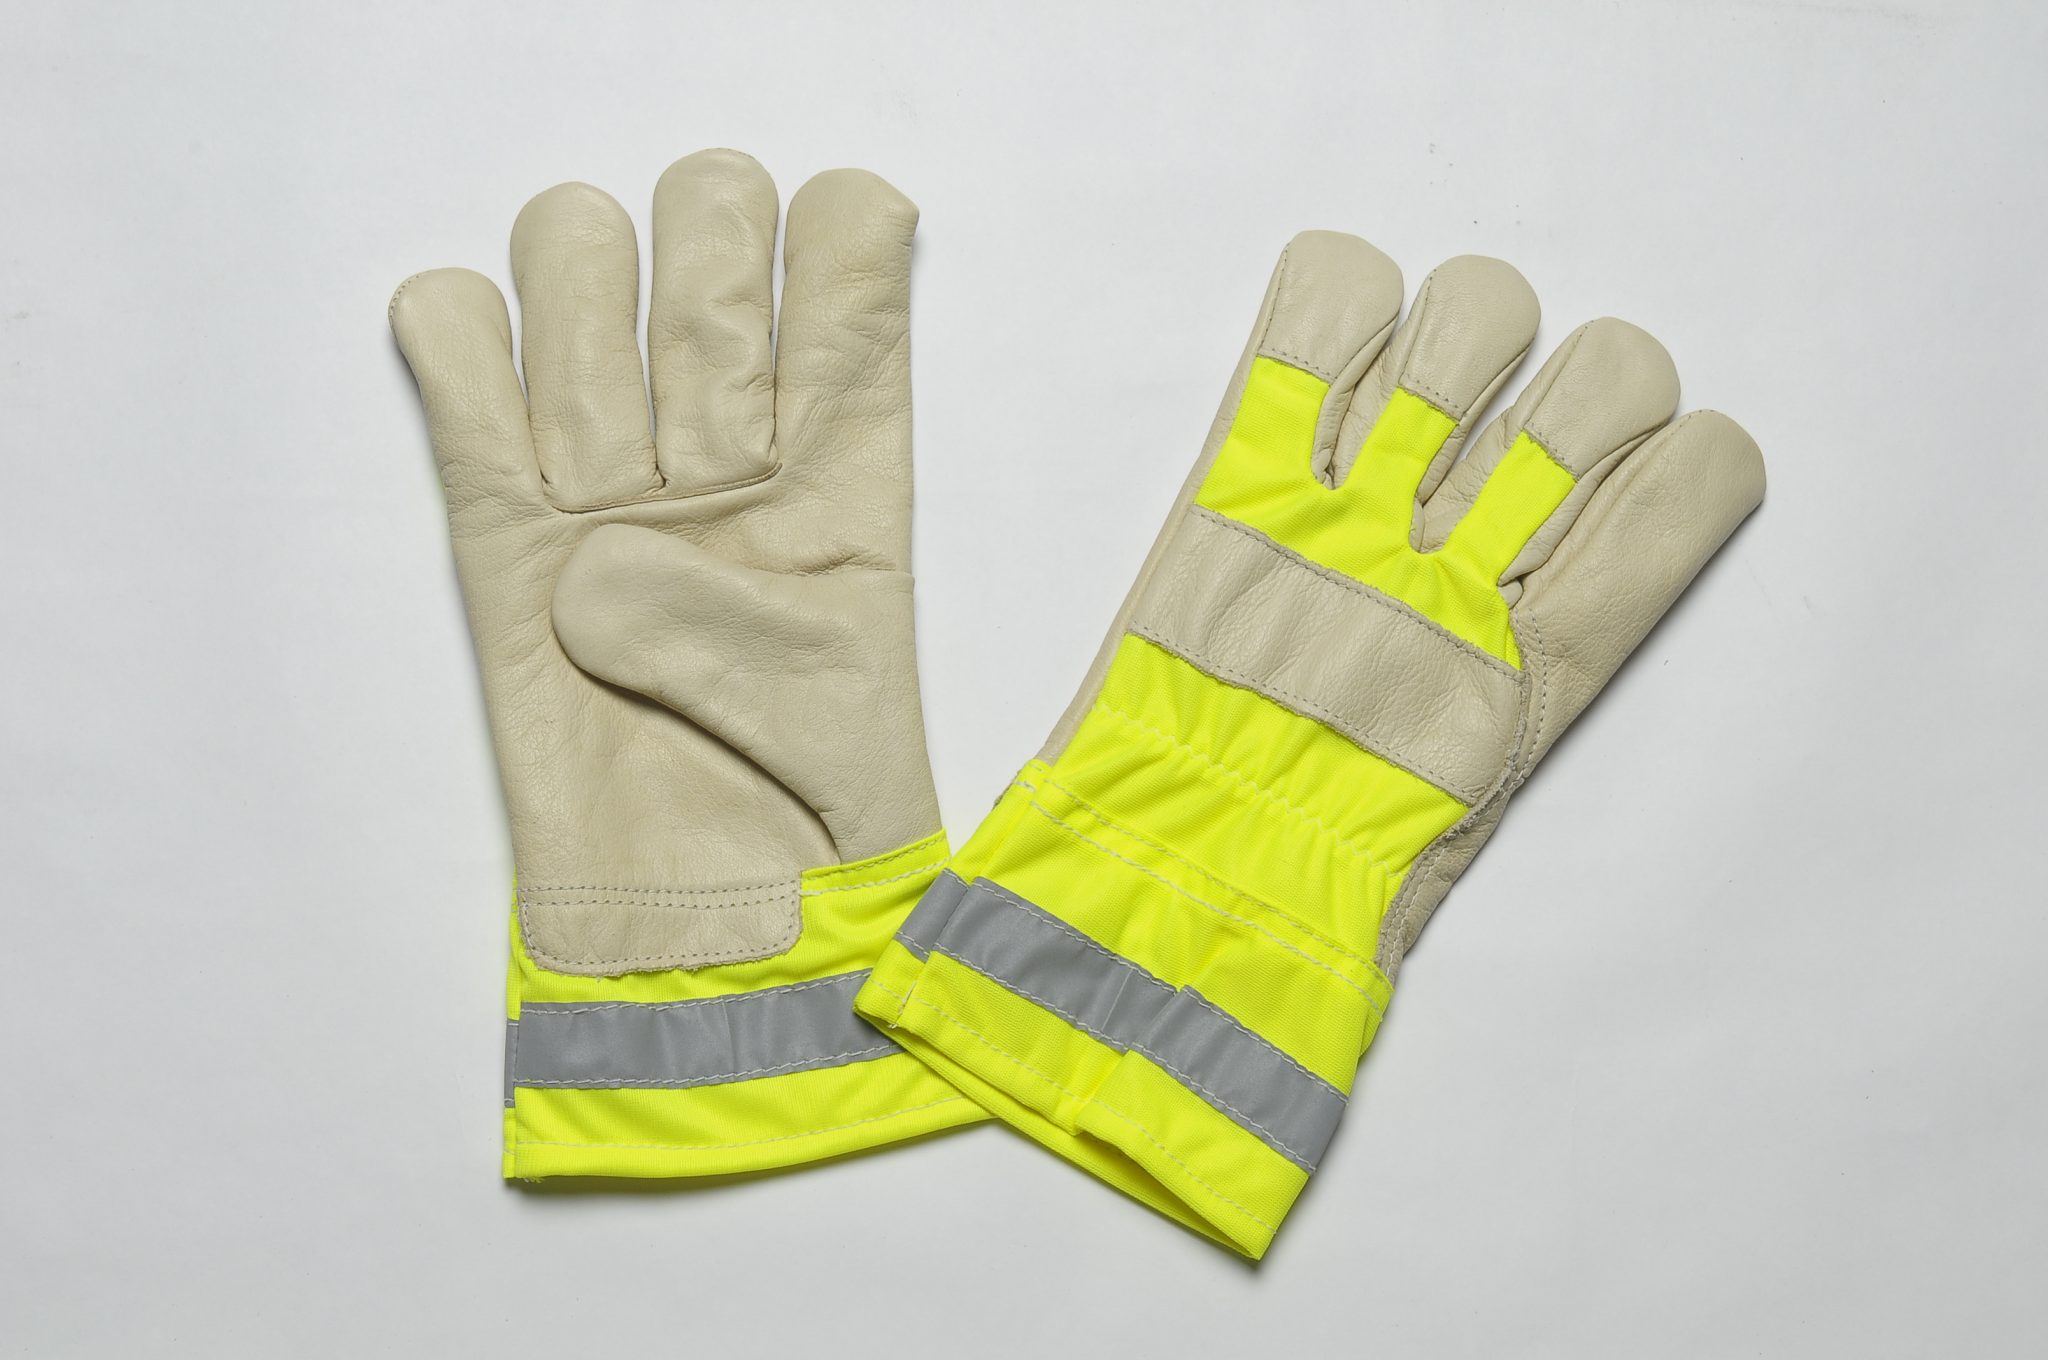 BEIGE GRAIN GLOVES. FLANNEL LINER IN THE PALM. HIGH VISIBILITY CUFF & BACK. ADJUSTABLE ELASTIC IN THE WRIST